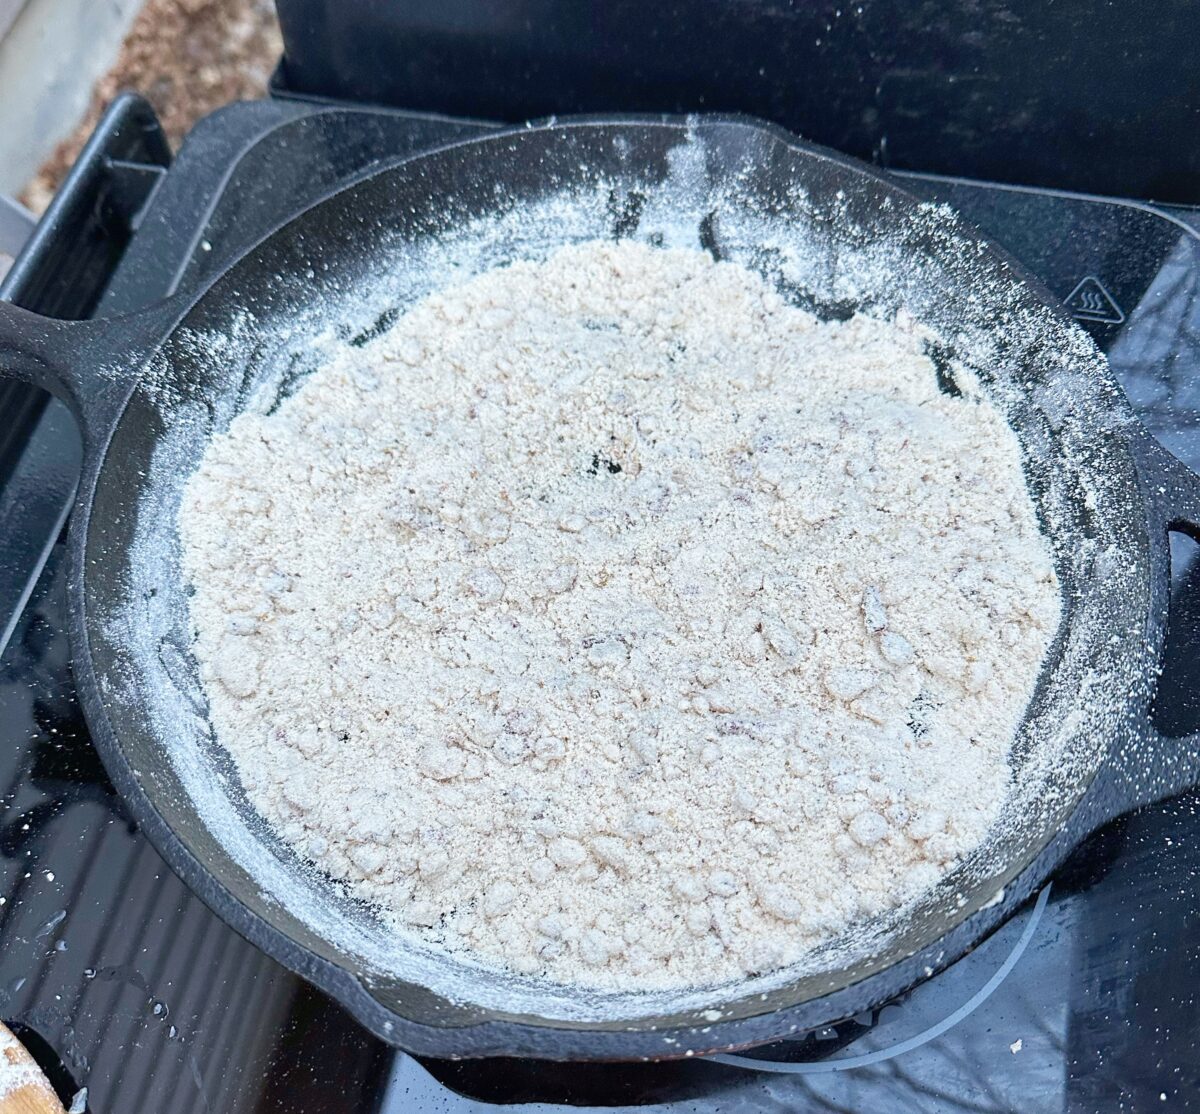 Farofa being cooked in a cast iron skillet.